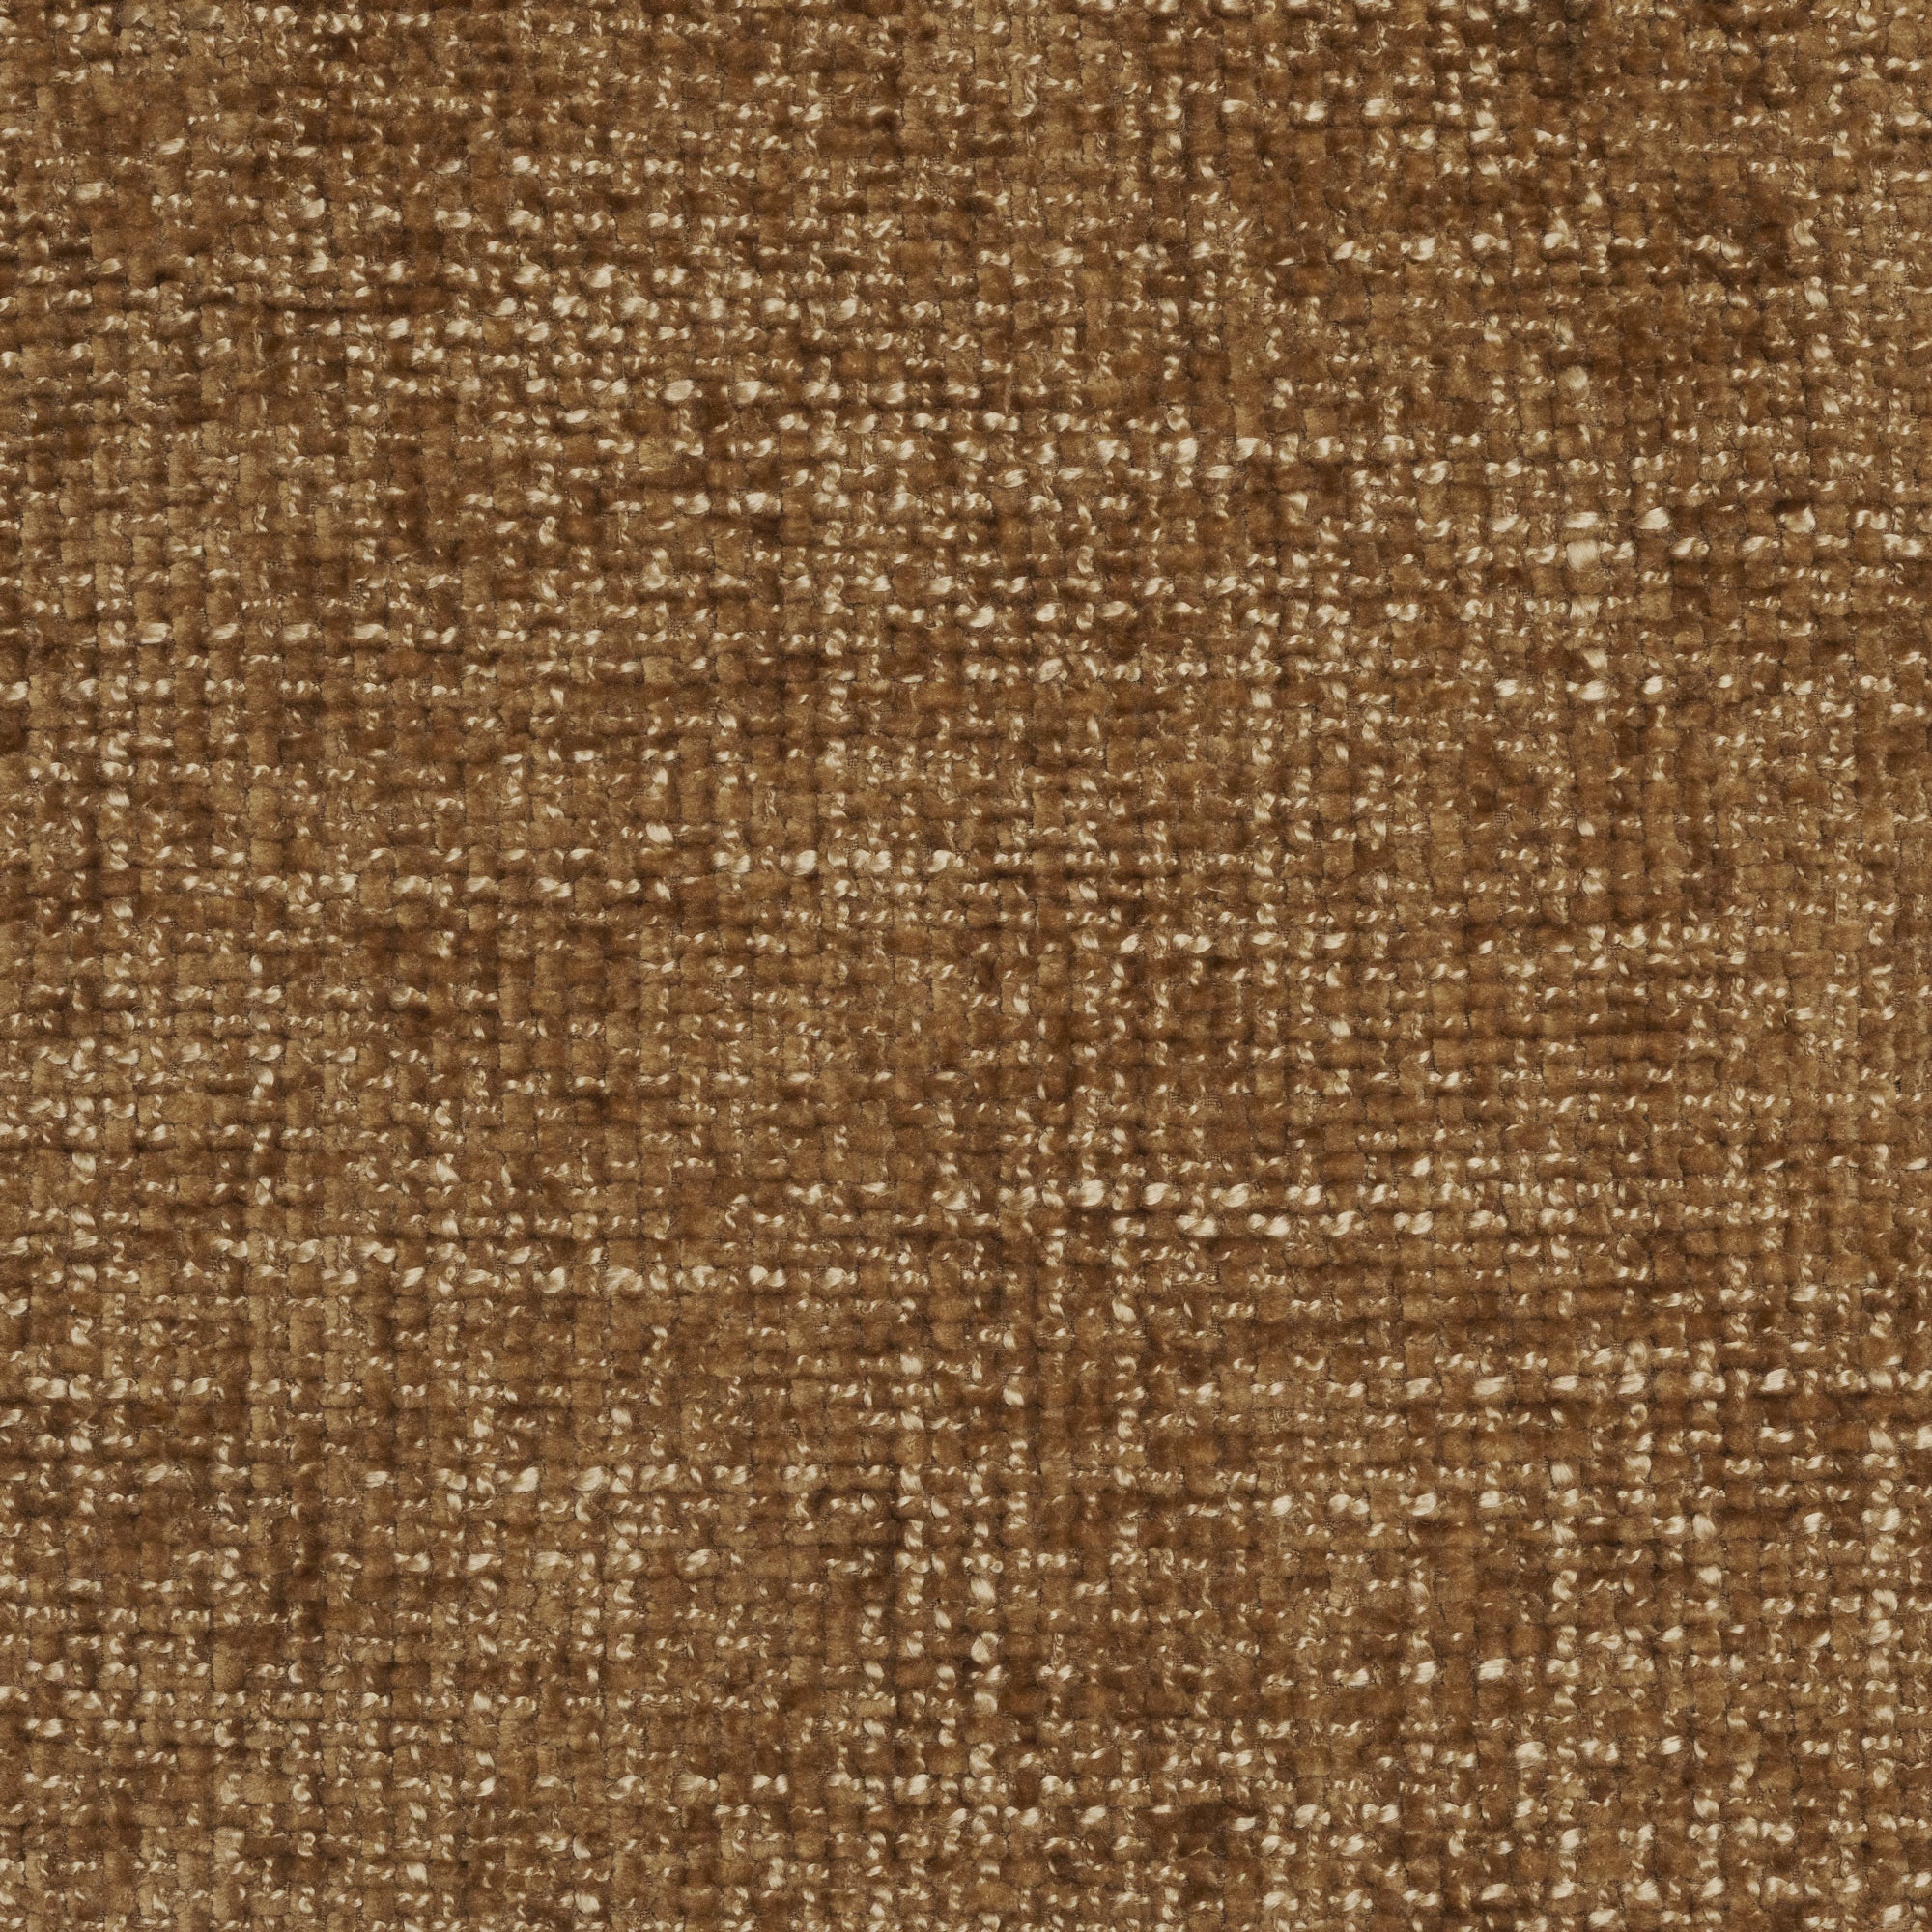 Hercules Steel Mist Chenille Basketweave Upholstery Fabric by the yard